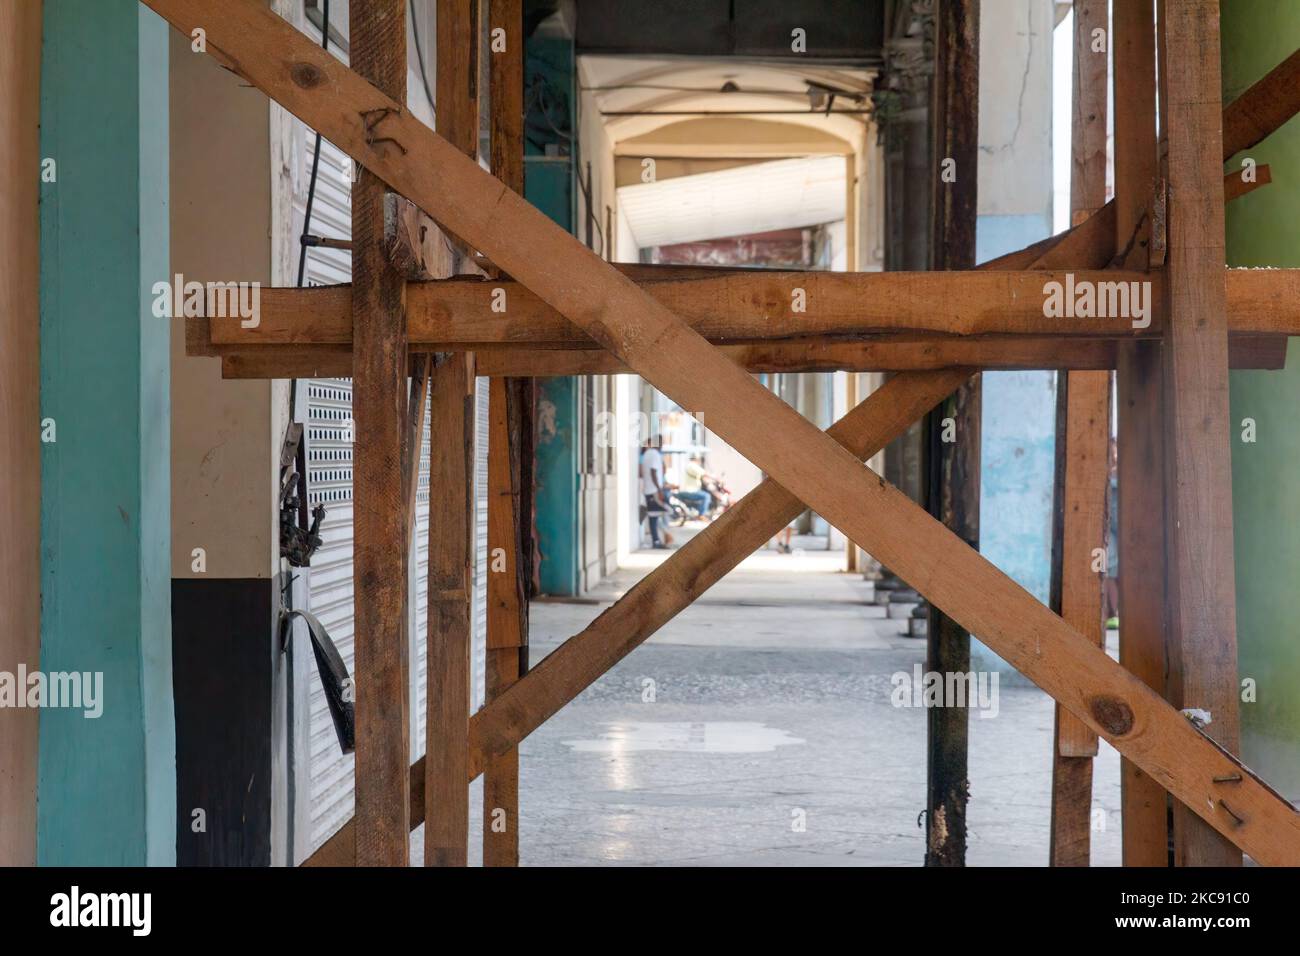 A wood support beam structure prevents a building porch from collapsing. Stock Photo